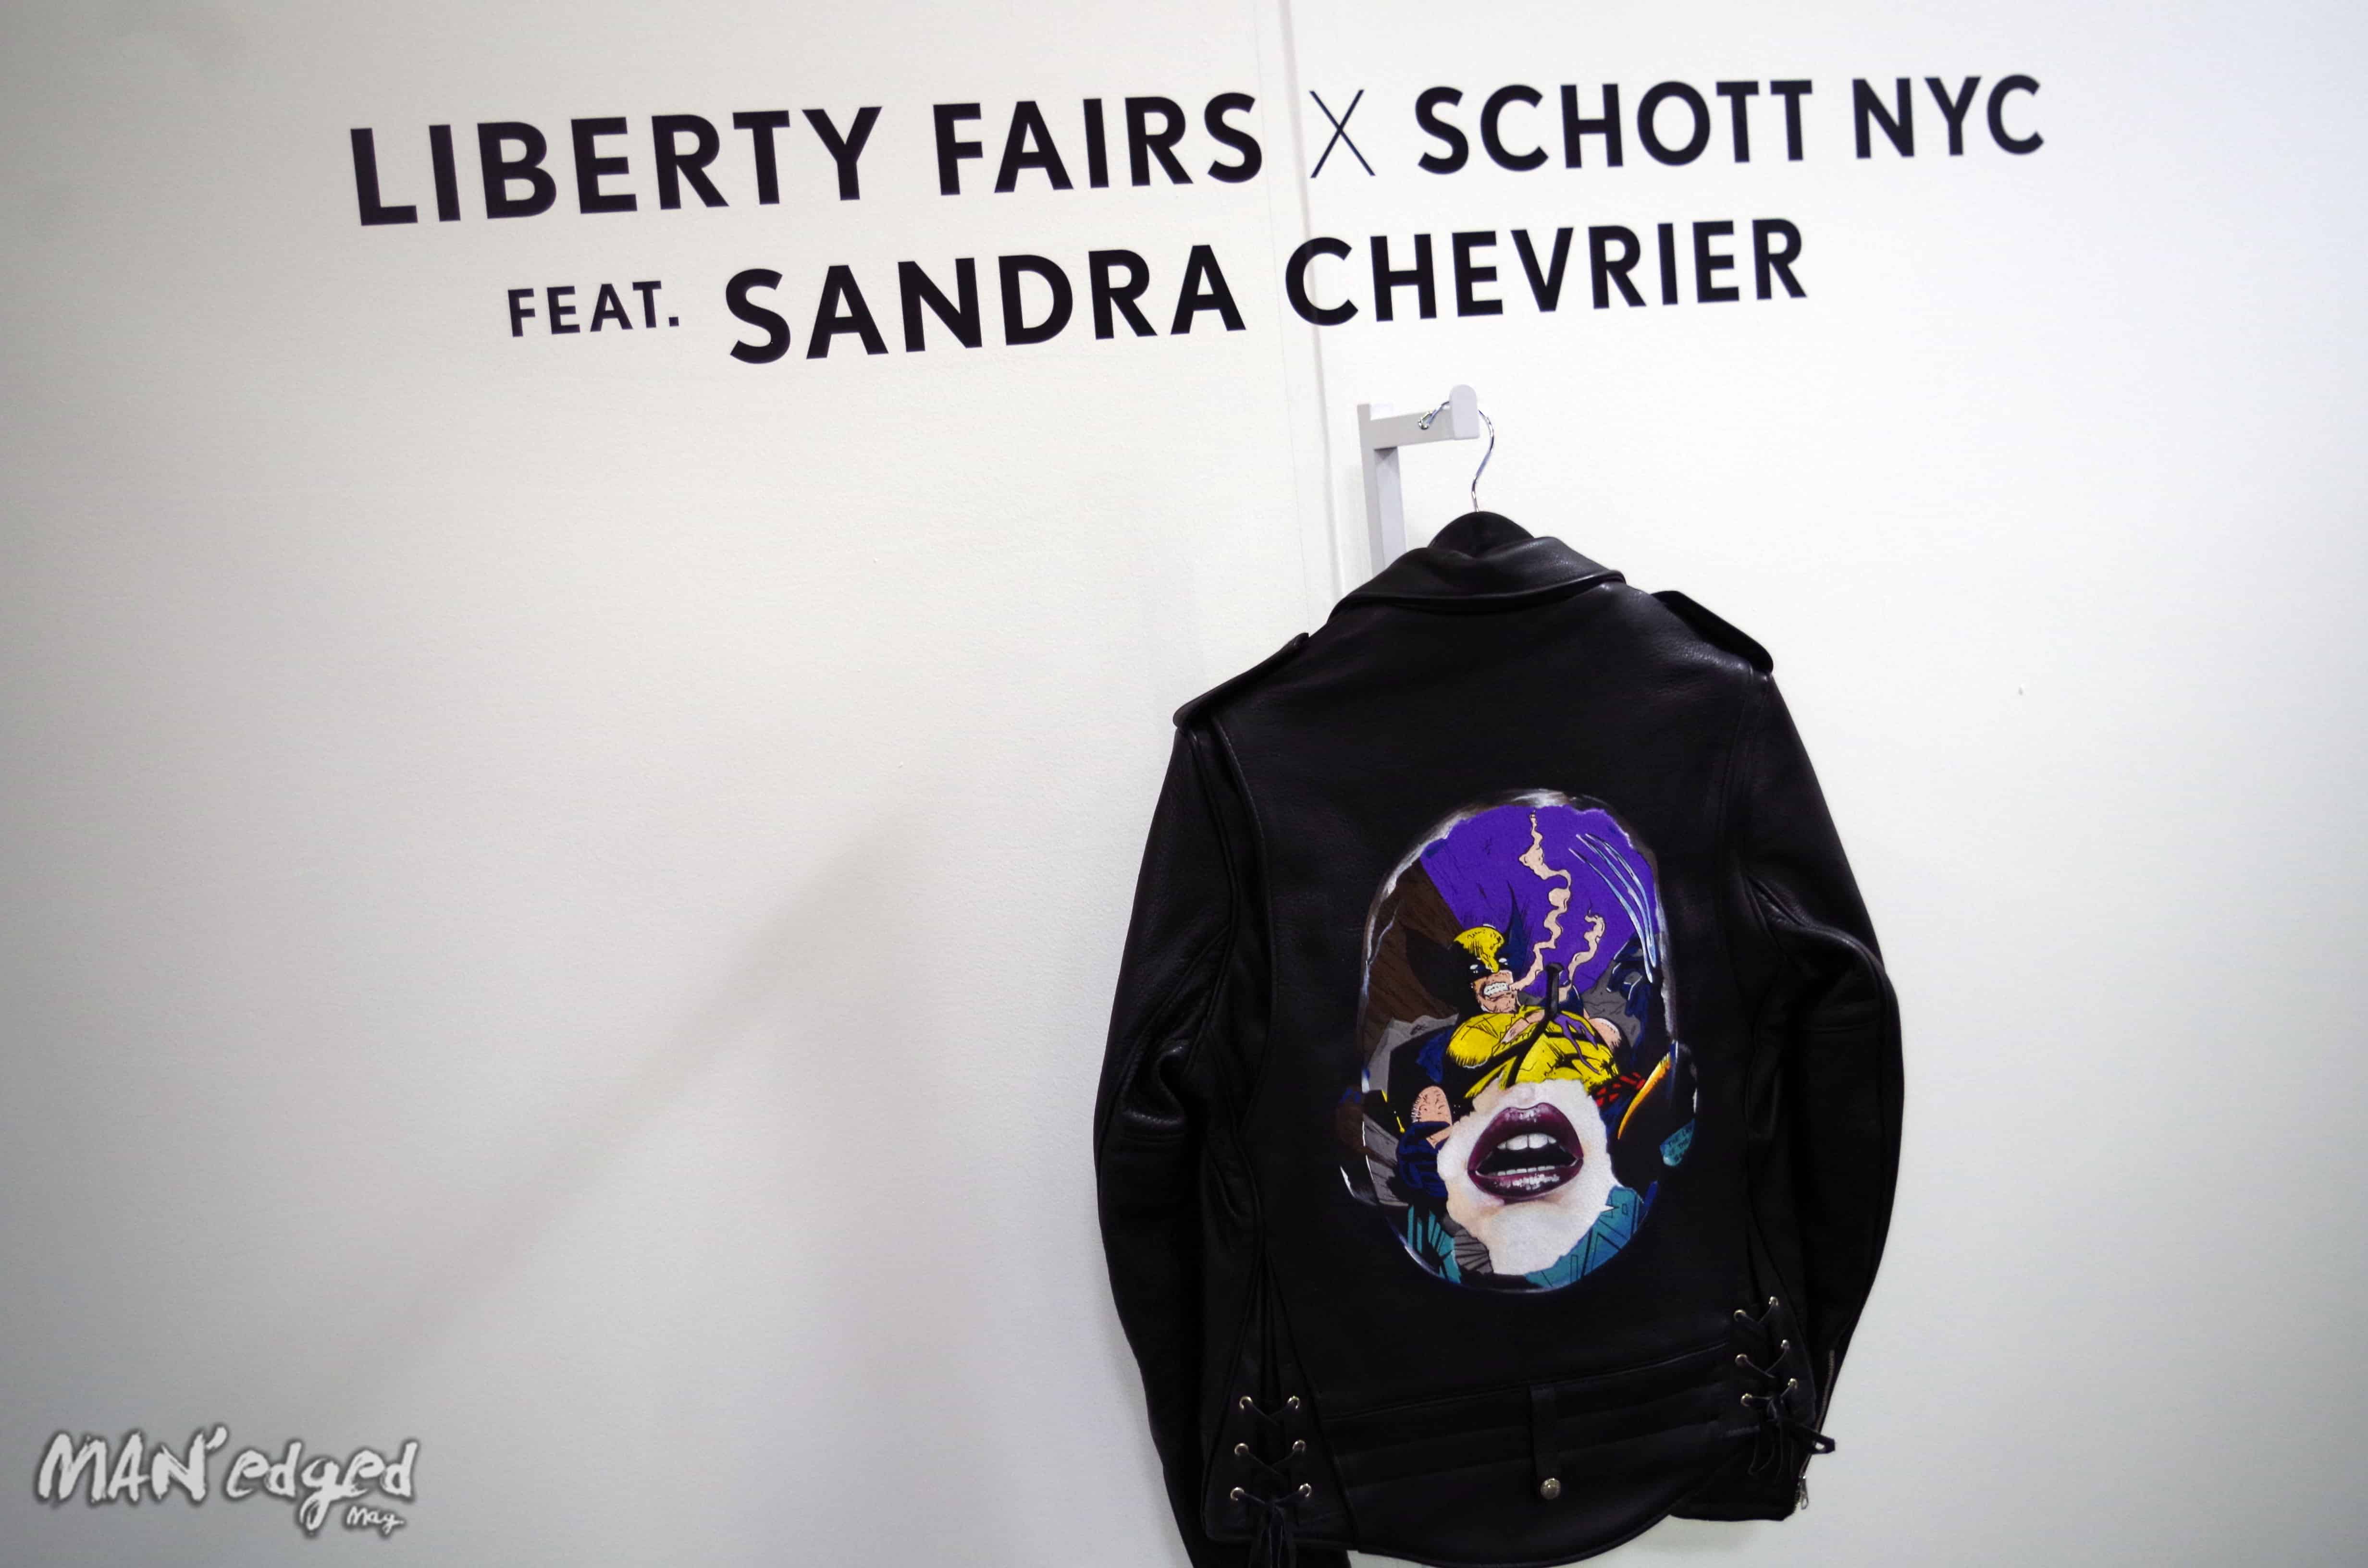 Liberty Fairs Art for Africa Levis and Schott NYC presentation